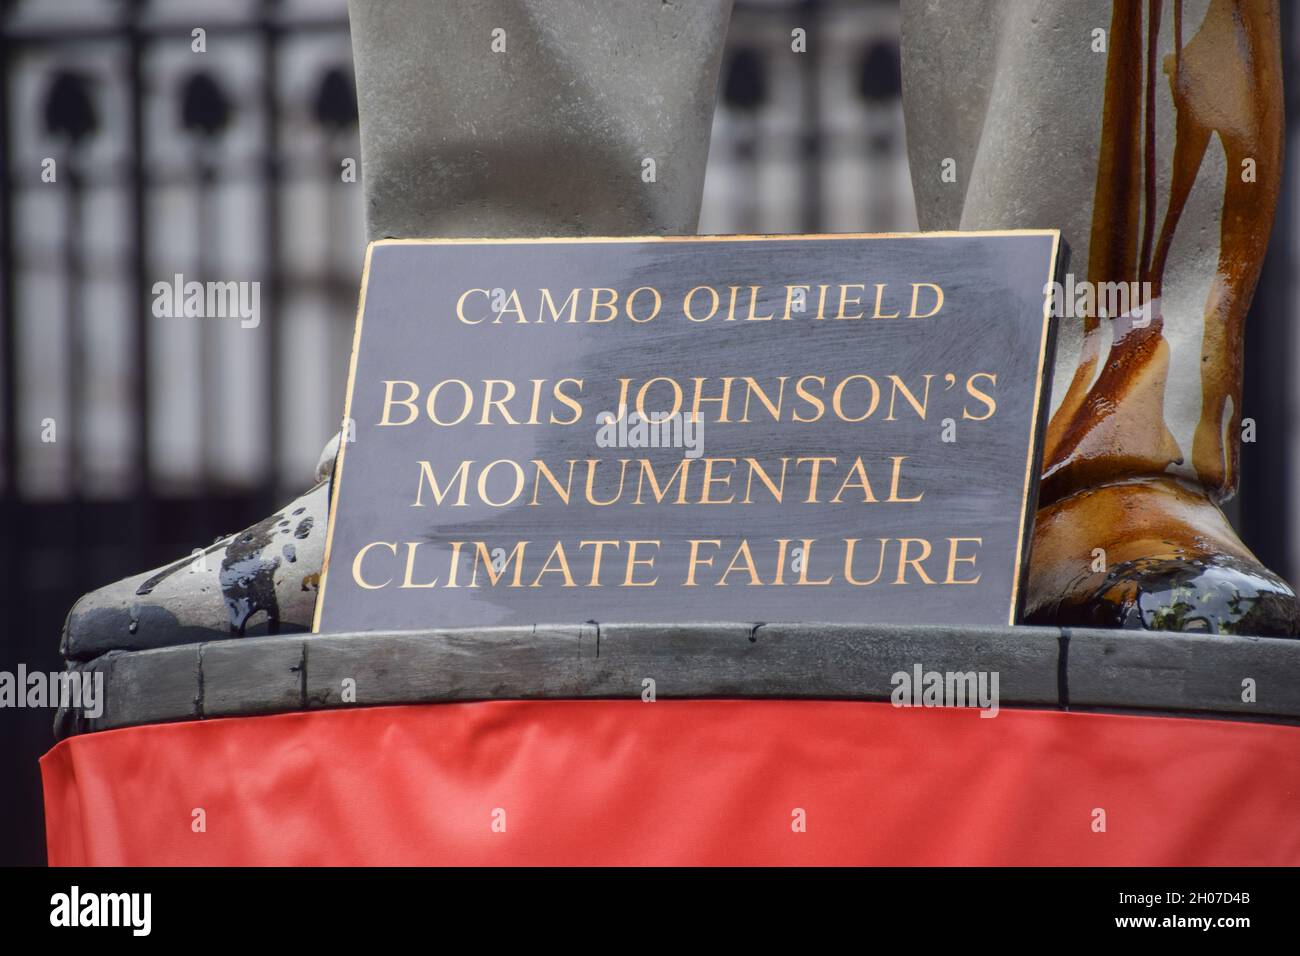 London, UK. 11th Oct, 2021. A sign which says 'Cambo Oil Field: Boris Johnson's Monumental Climate Failure' is seen at the foot of the statue of Boris Johnson splattered with fake oil, during the Stop Cambo protest.Greenpeace activists locked themselves to barrels and installed a large statue of Boris Johnson smeared in fake oil outside Downing Street, in protest against the Cambo oil field. Credit: SOPA Images Limited/Alamy Live News Stock Photo